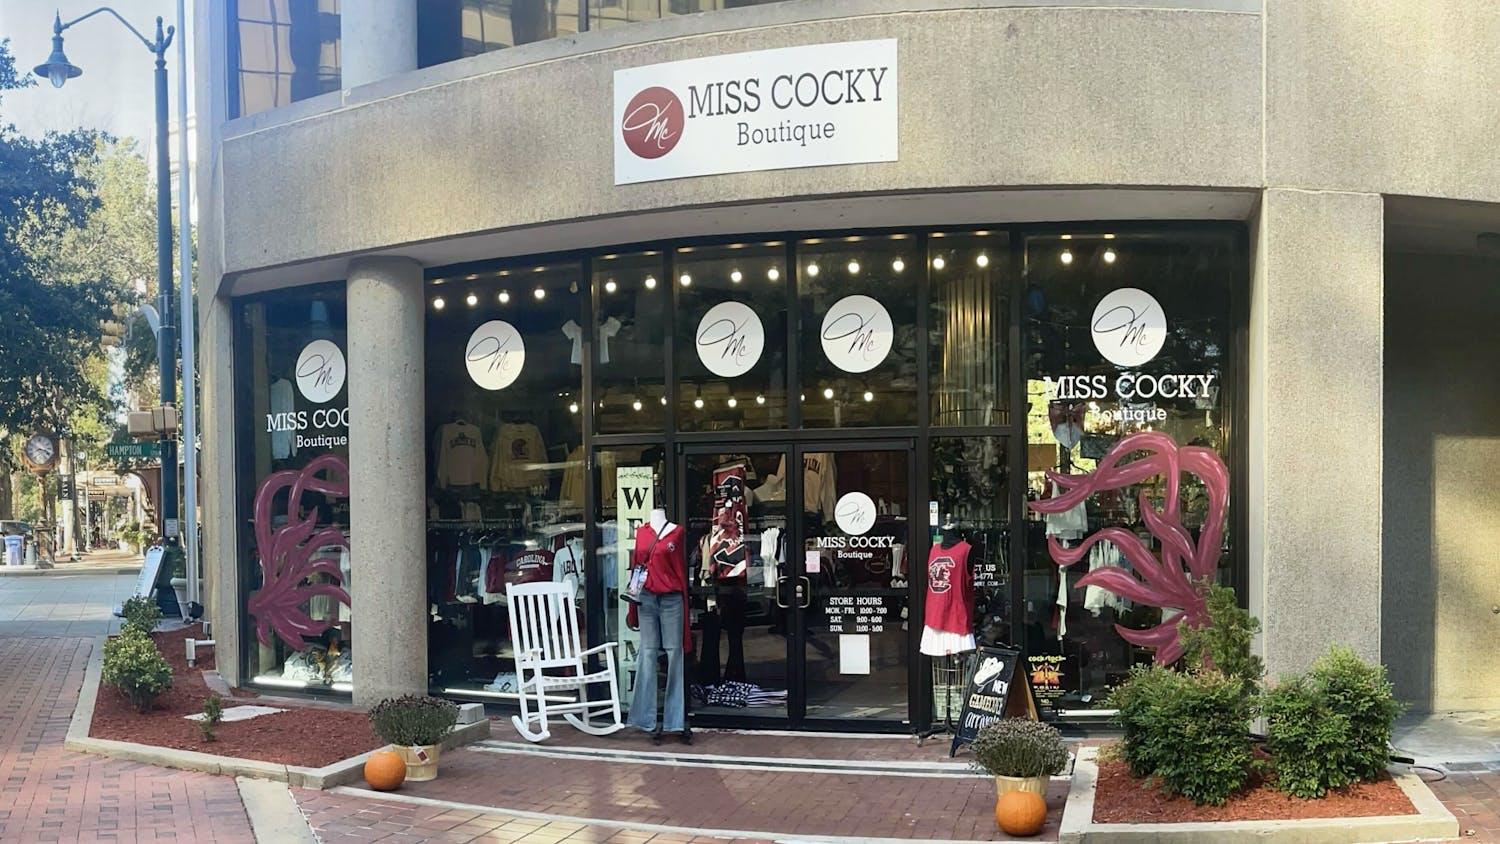 Miss Cocky Boutique does both e-commerce and social selling. The boutique is located at 1450 Main St. in Columbia, SC.